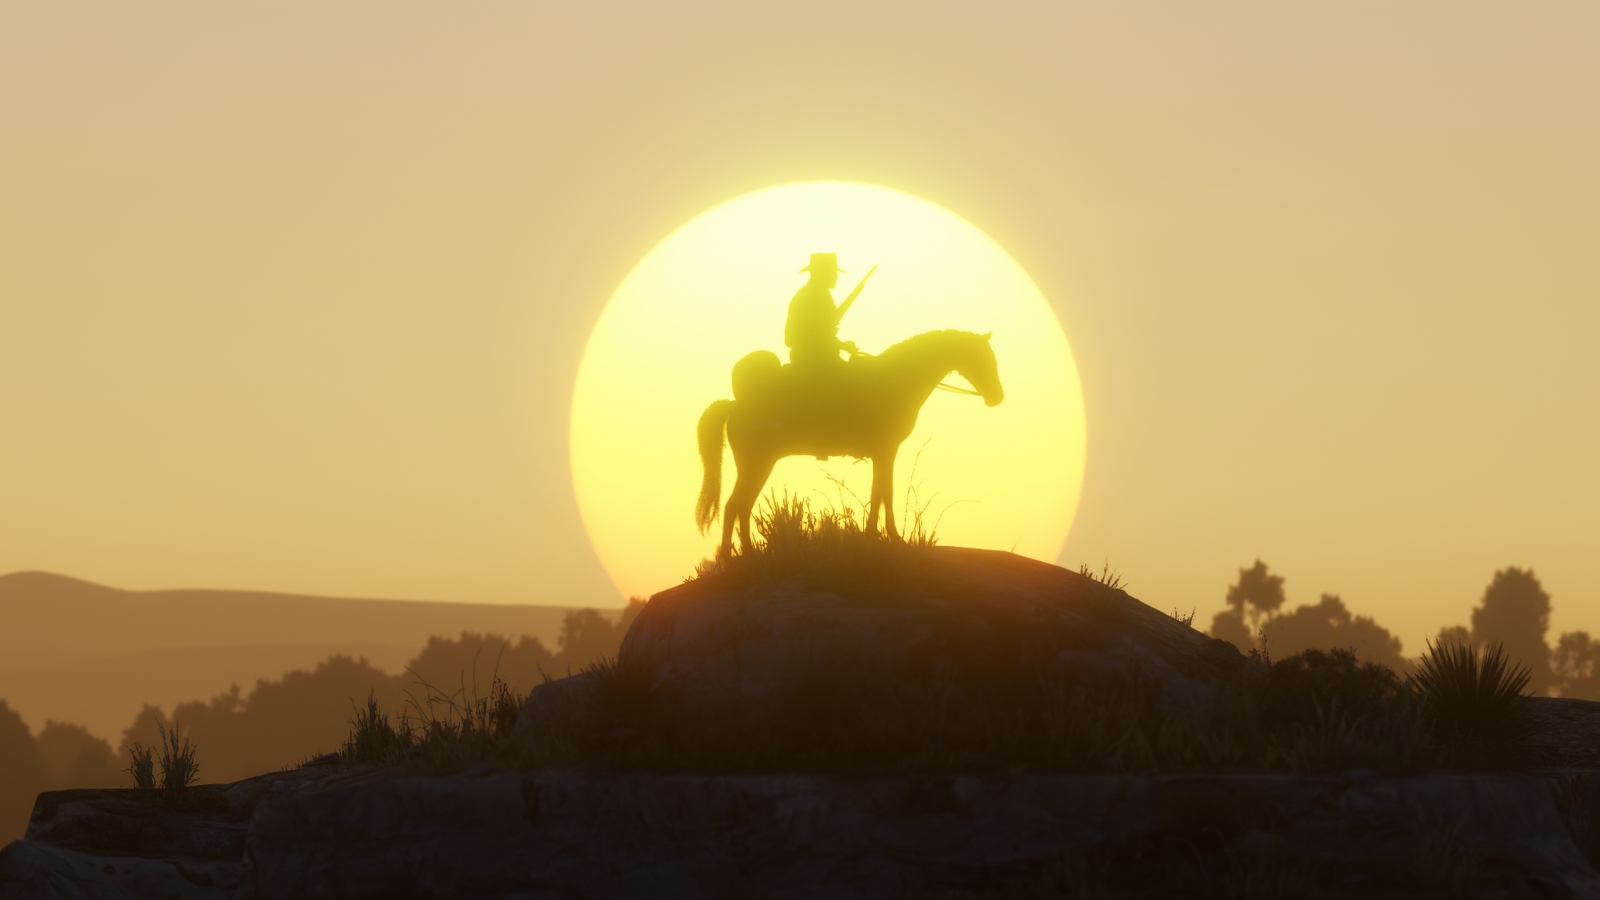 Red Dead Redemption II and Red Dead Online hitting PC Nov 5th - Gaming Nexus